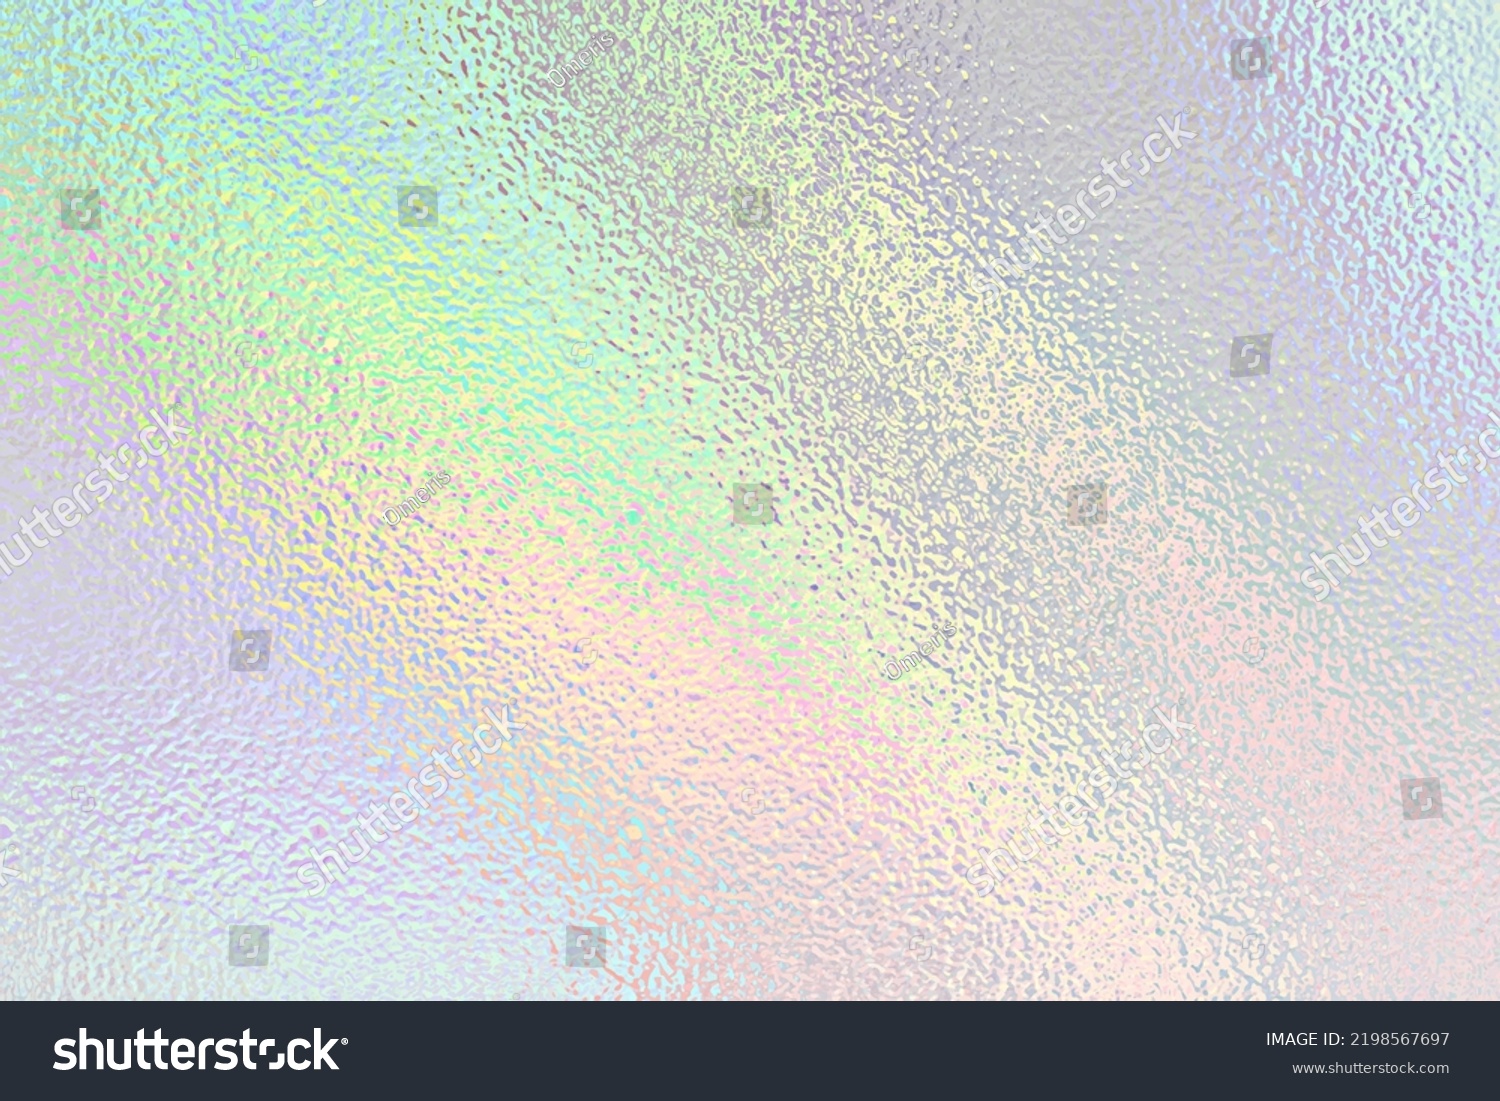 Holograph background. Holographic texture foil effect. Hologram abstract backdrop. Iridescent backdrop. Rainbow gradient. Pearlescent metal surface for designs prints. Pastel tone. Vector illustration #2198567697